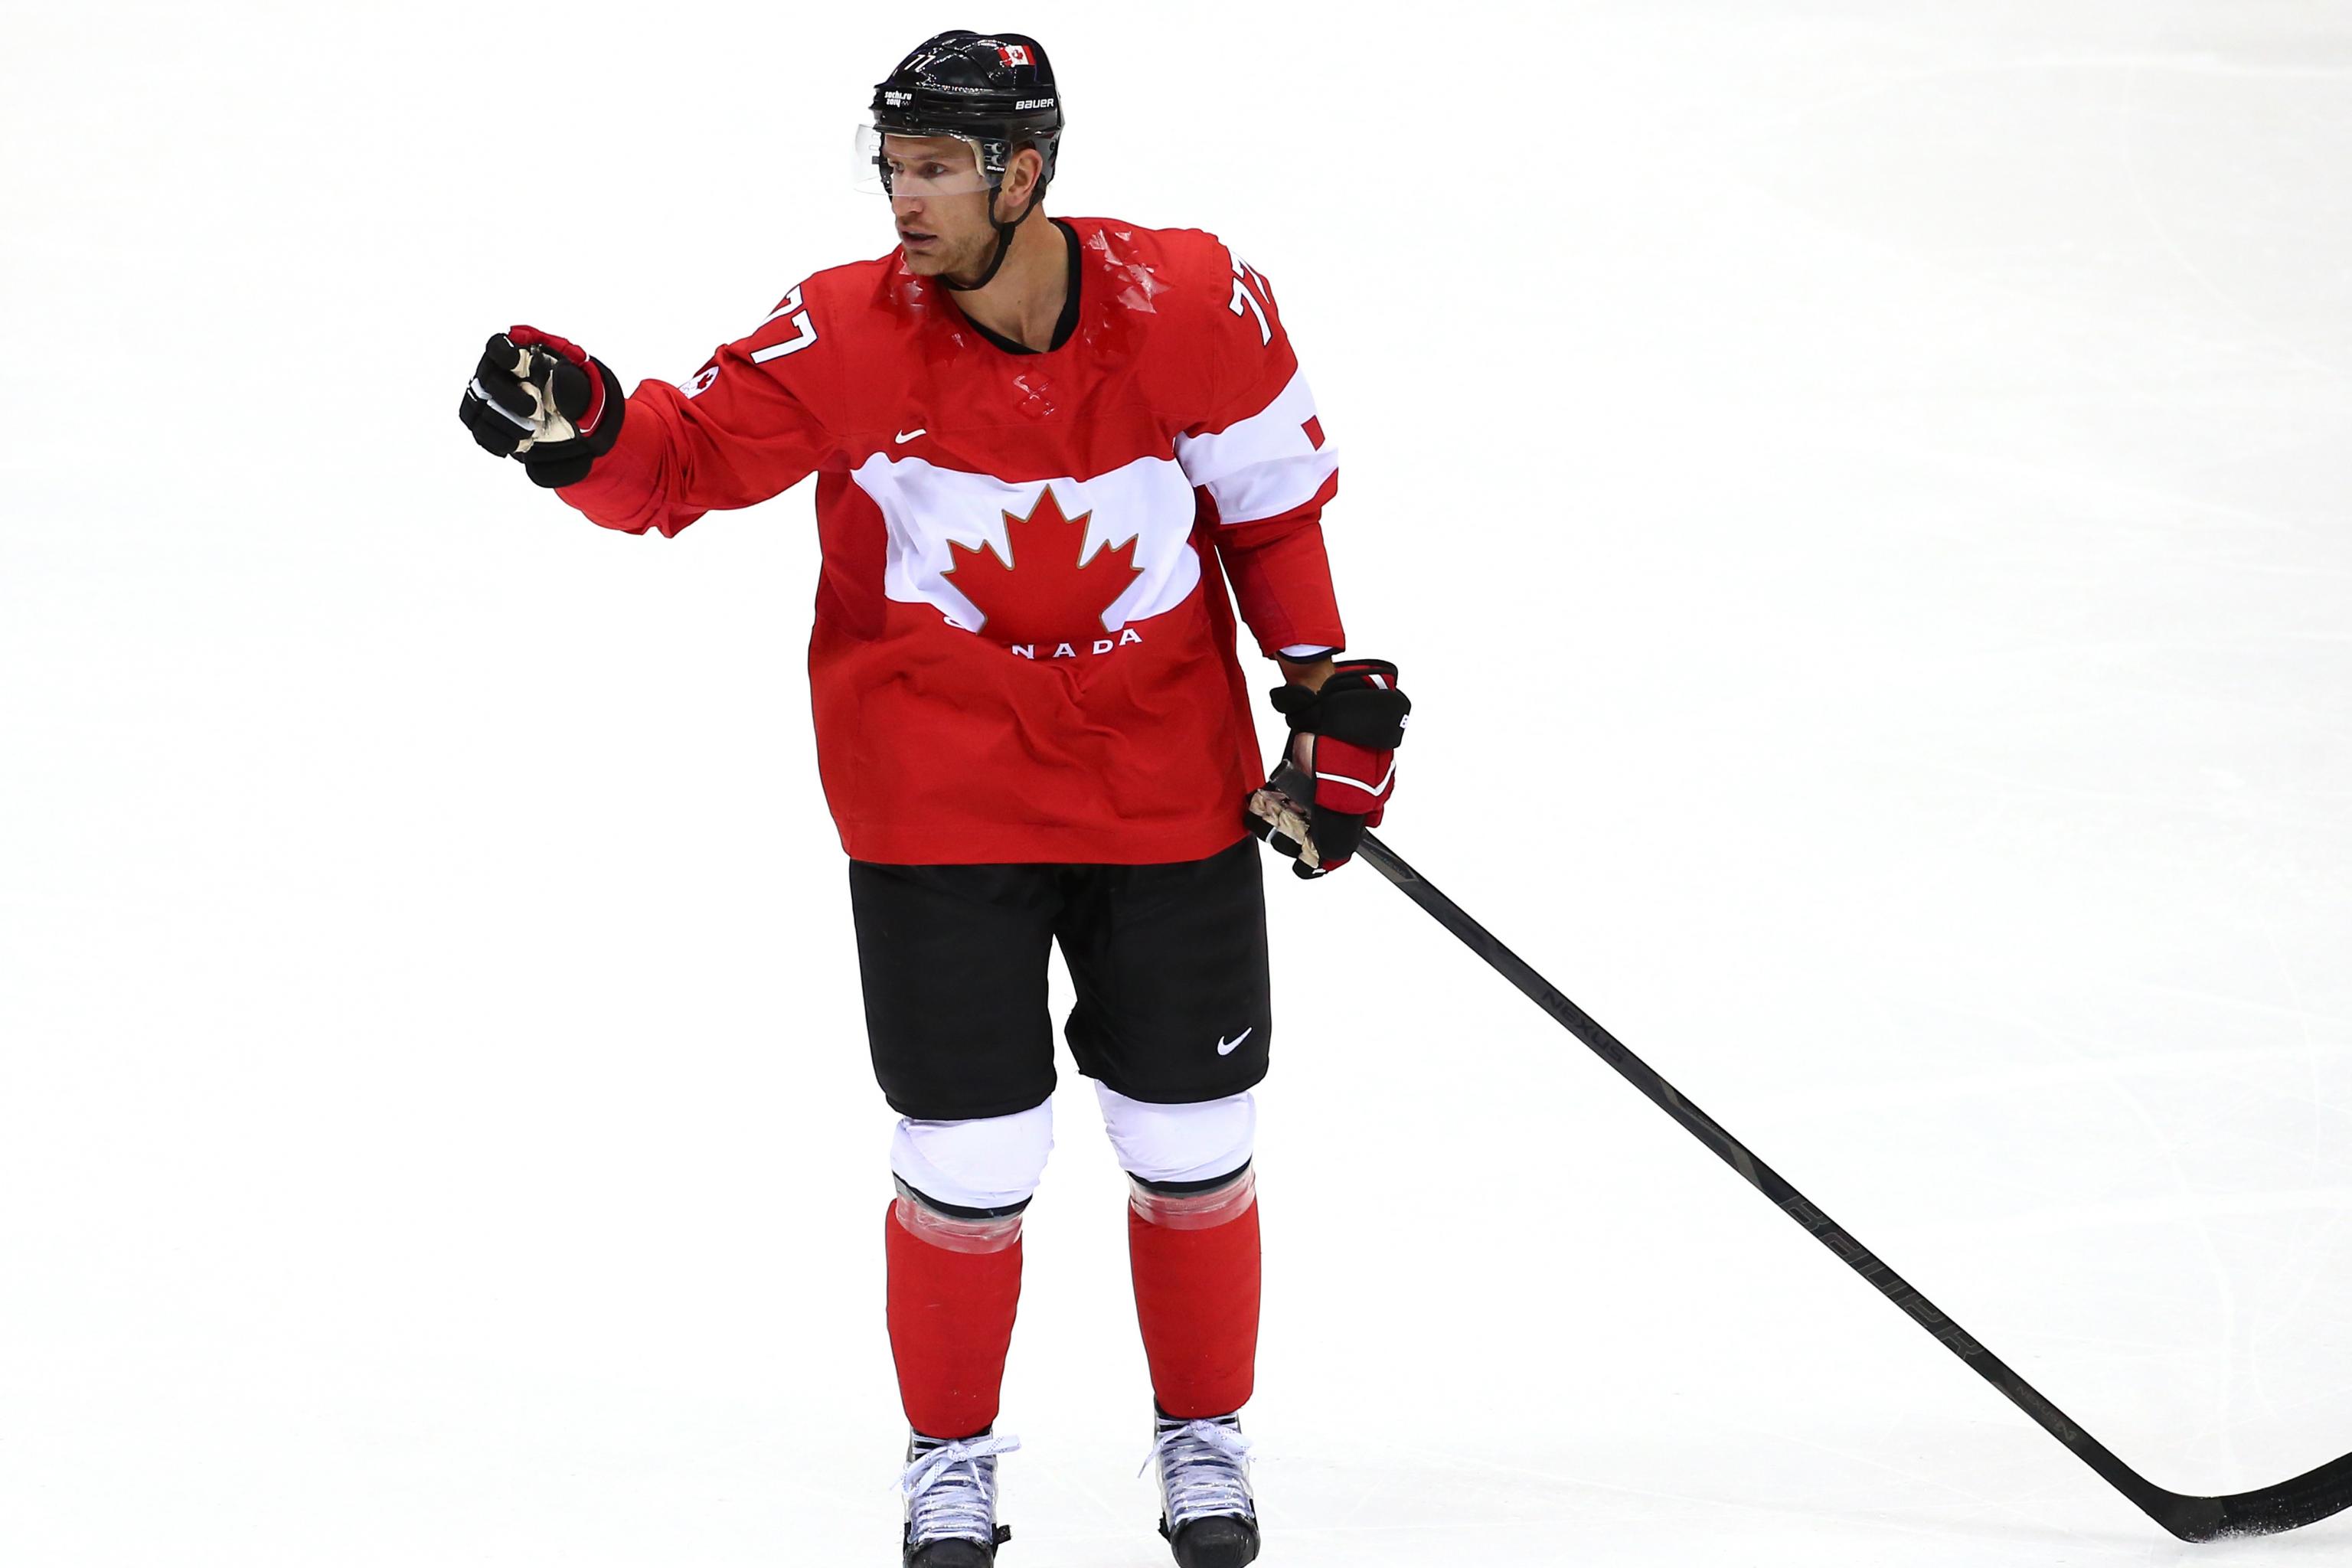 Crosby, Toews lead list of players invited to Canada's summer orientation  camp